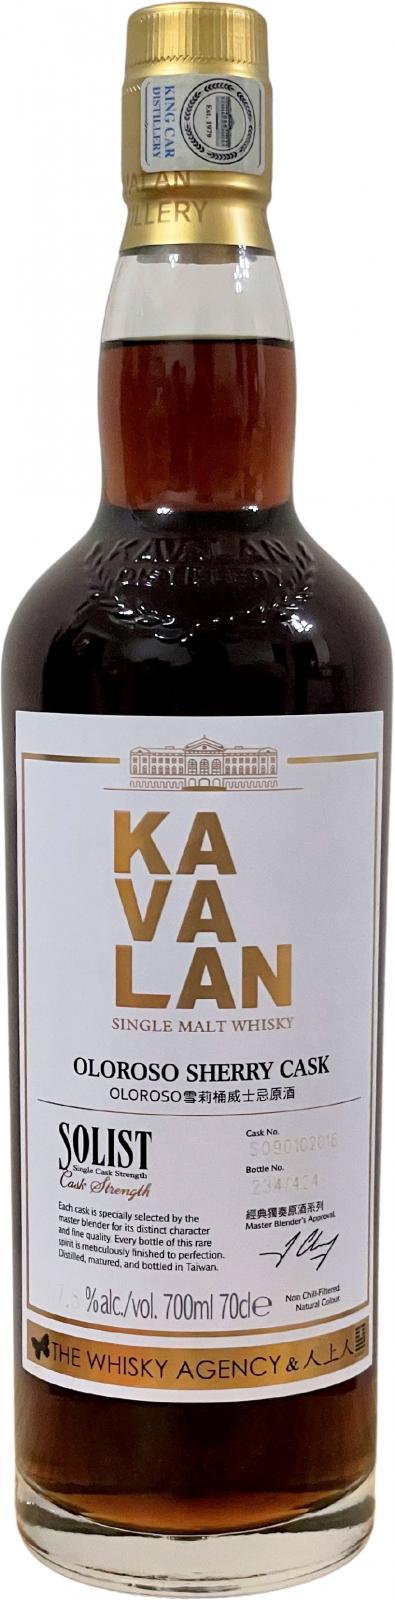 Kavalan Solist Oloroso Sherry Cask S090102016 The Whisky Agency & ARen Trading 57.8% 700ml